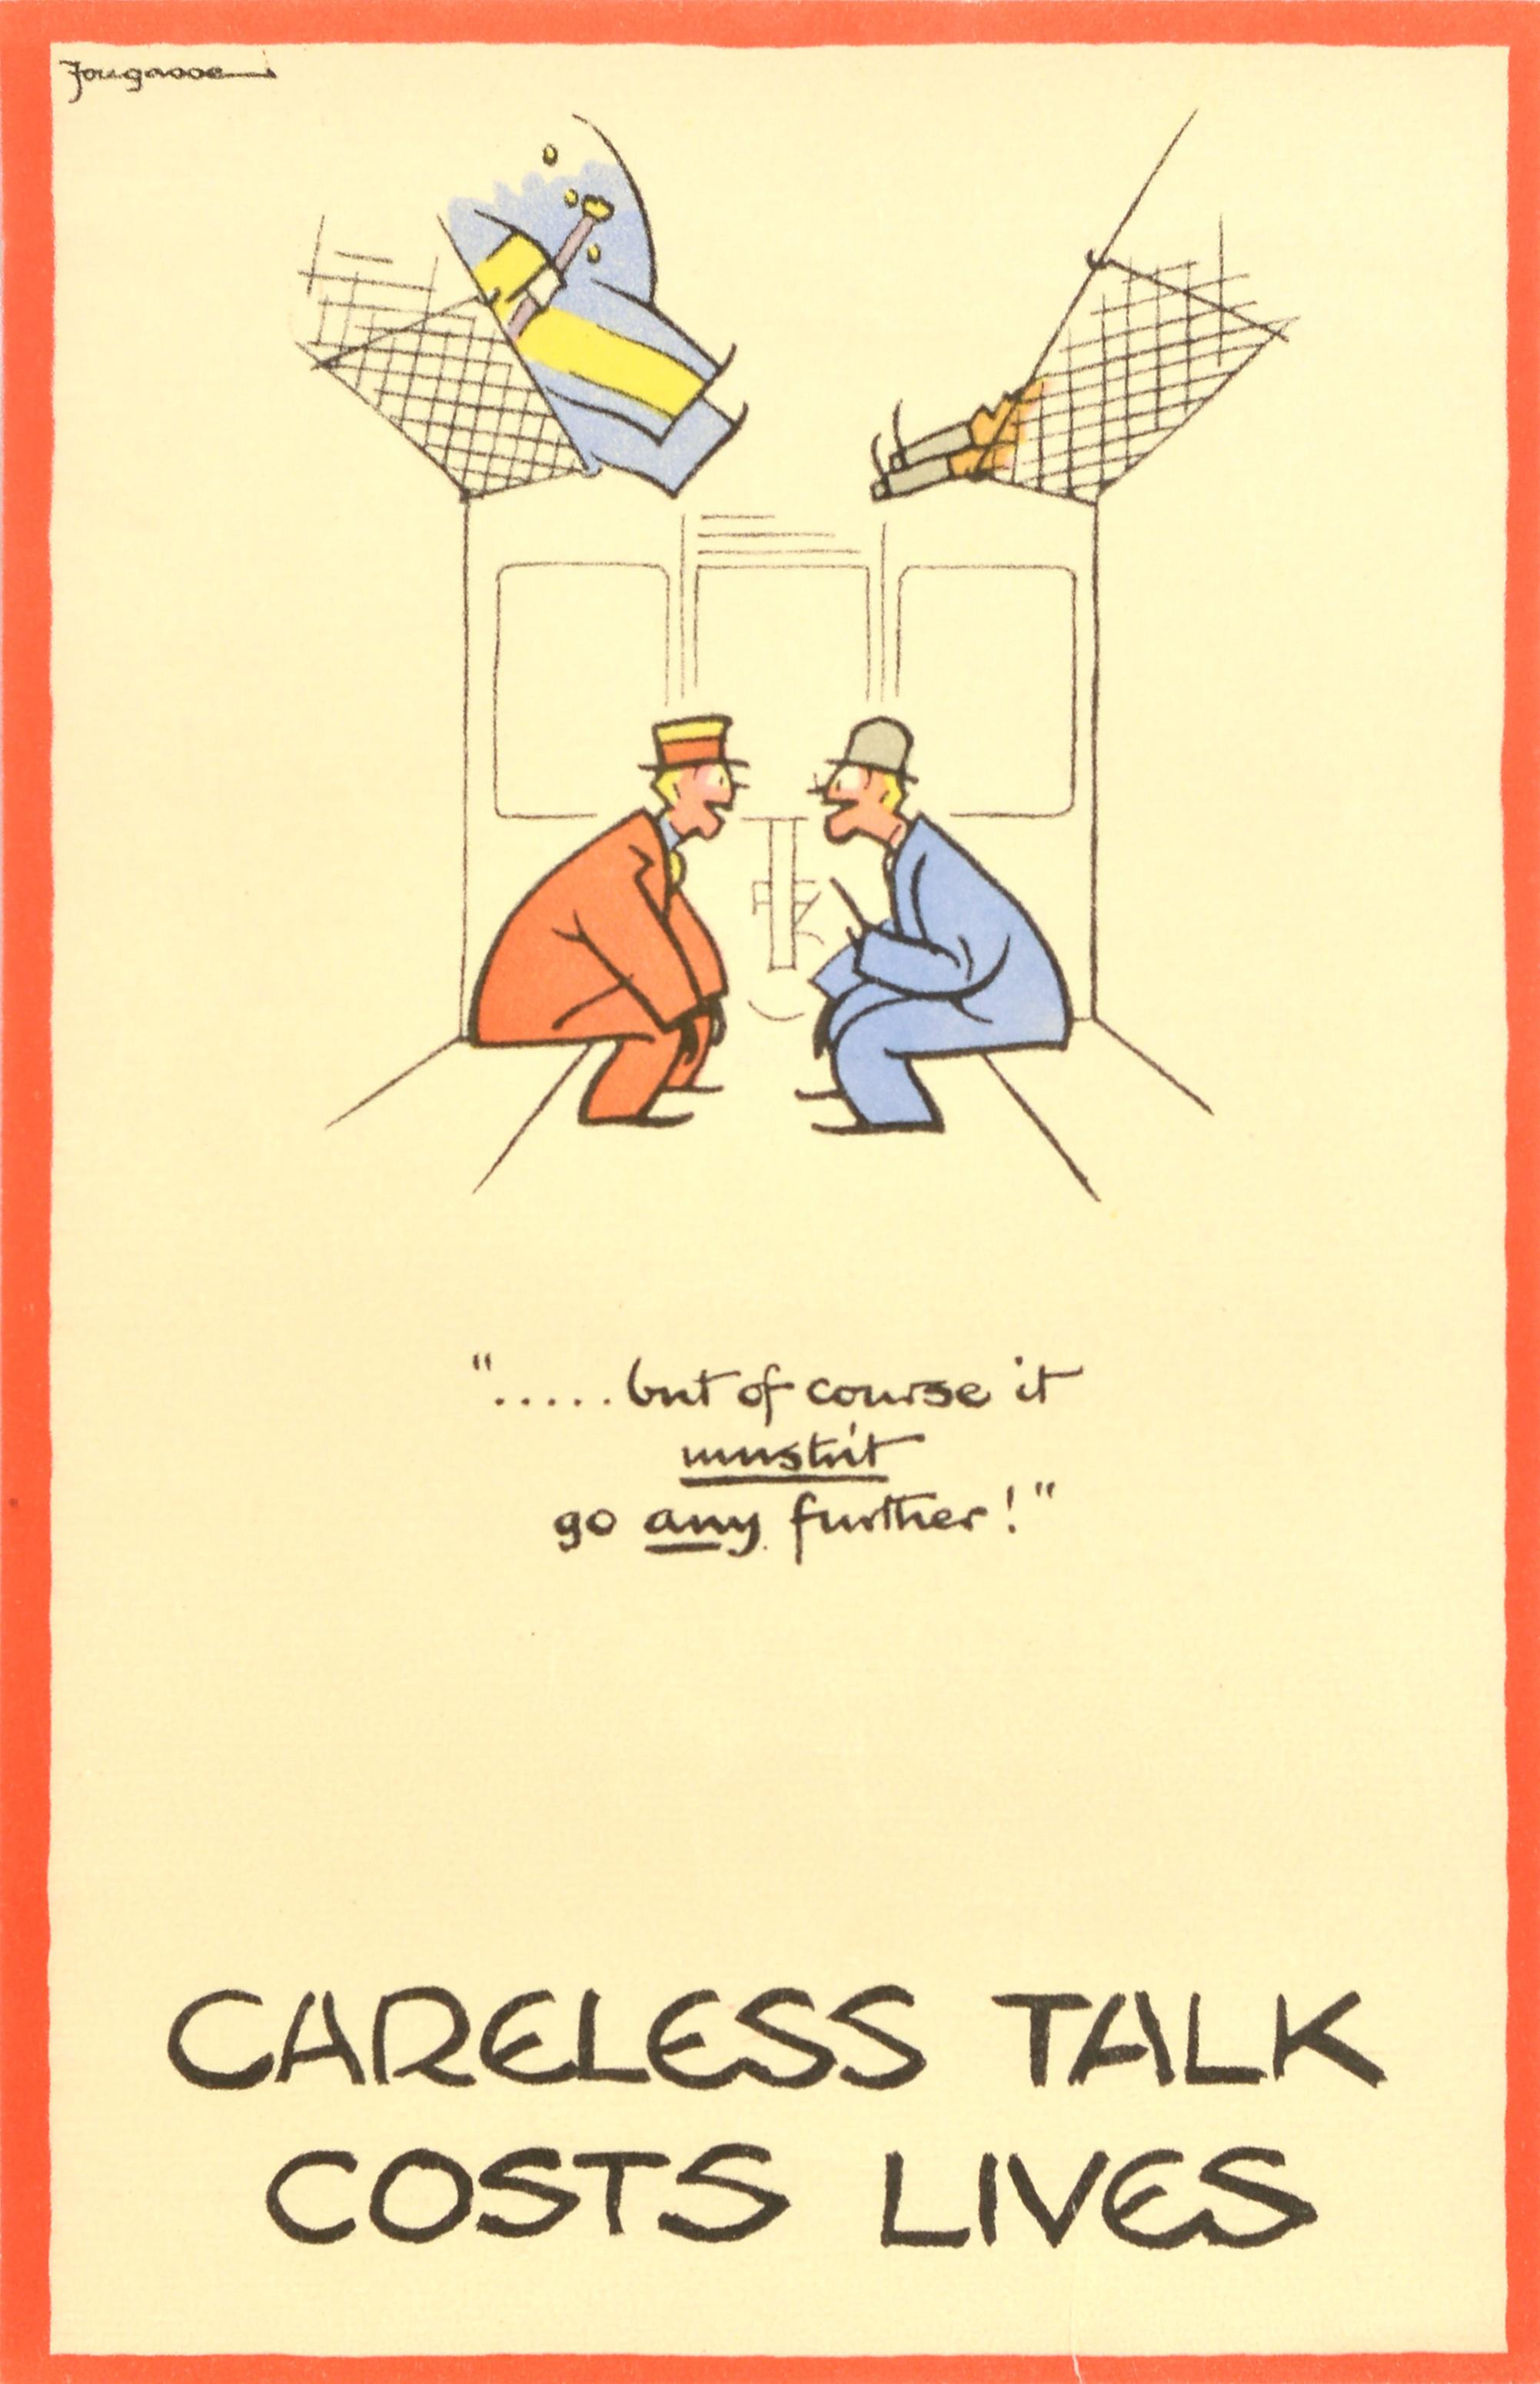 Fougasse (Cyril Kenneth Bird) Print - Original Vintage War Poster Careless Talk Costs Lives Go Any Further WWII Train